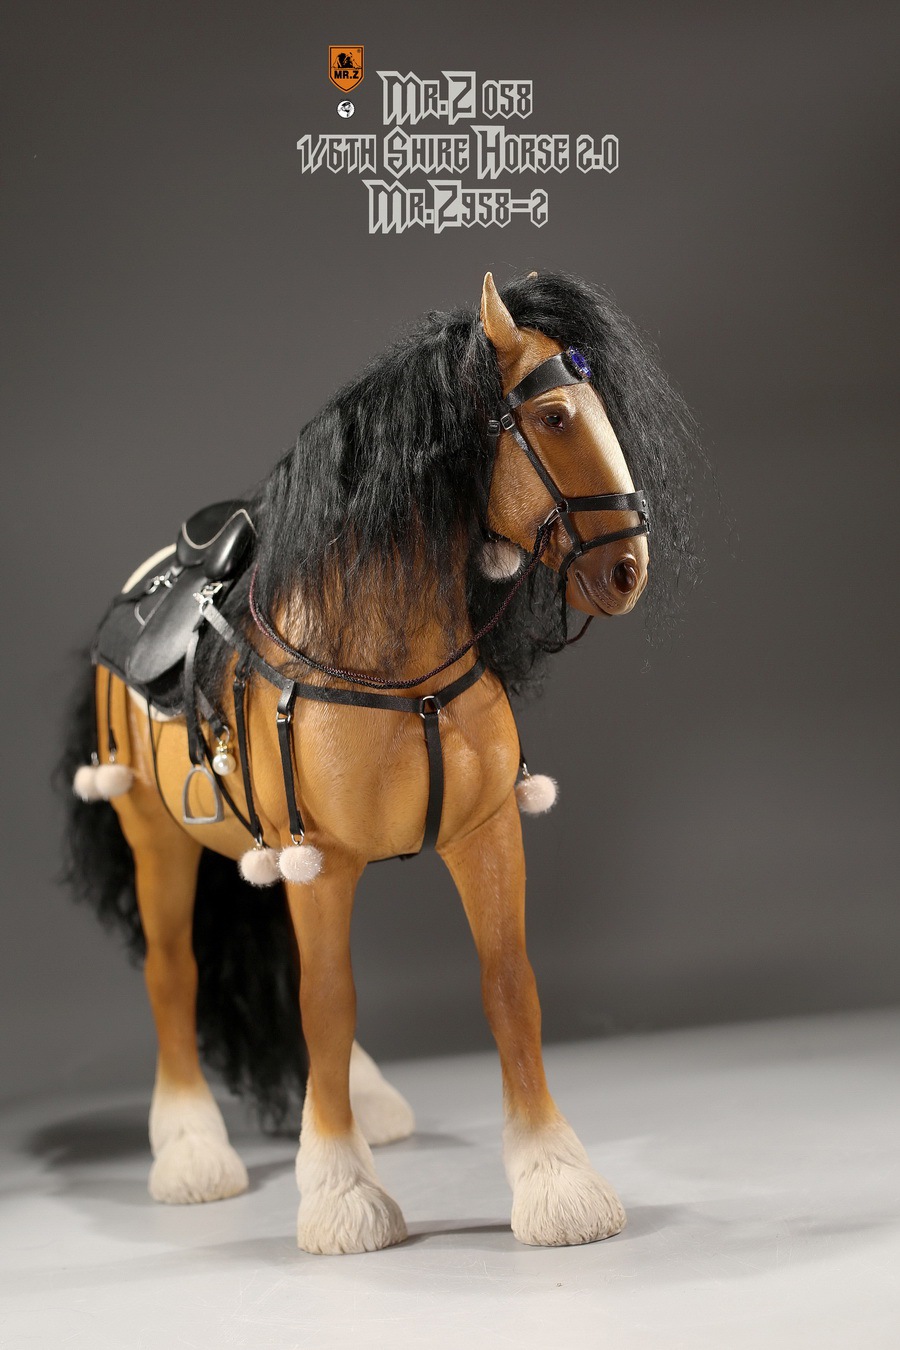 NEW PRODUCT: MR. Z: 58th round-Shire Horse 2.0 version full set of 5 colors  08575112